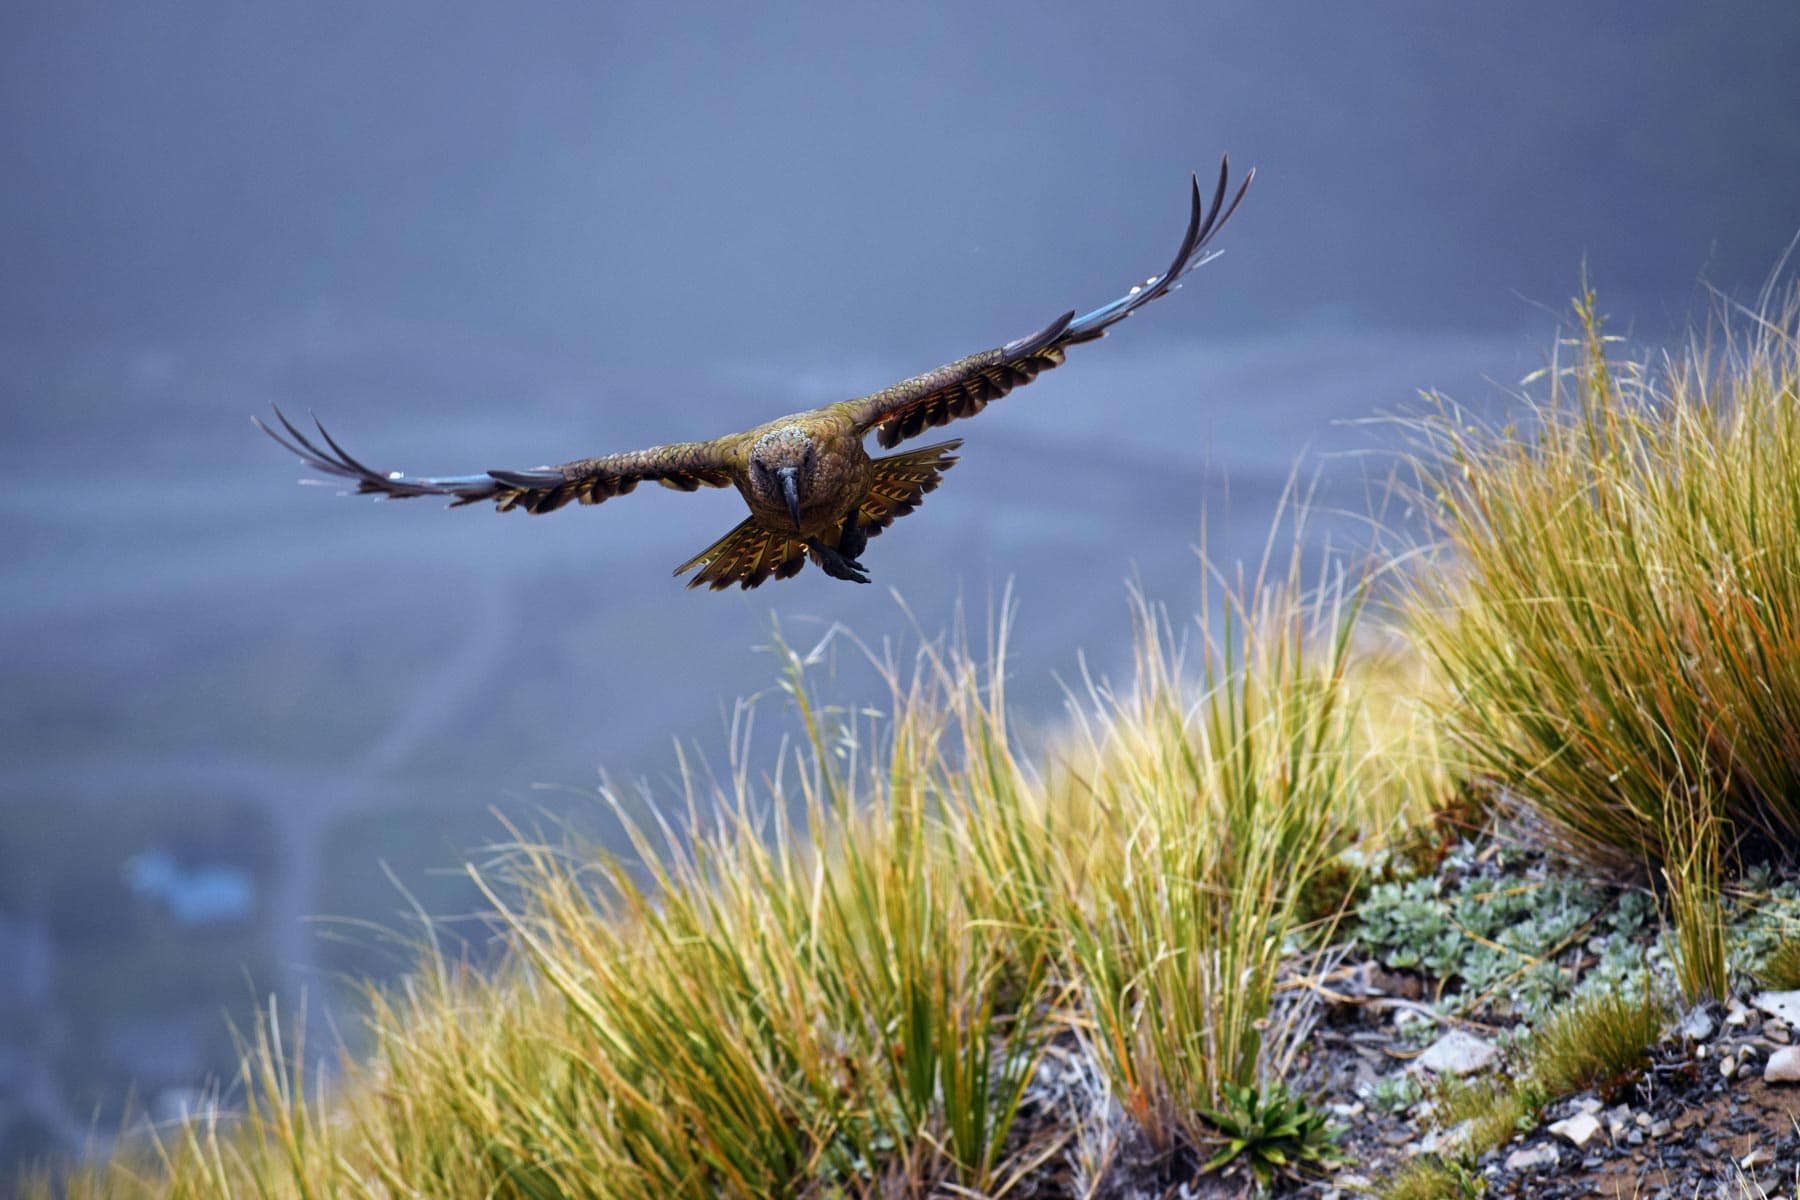 Kea flying in the Southern Alps